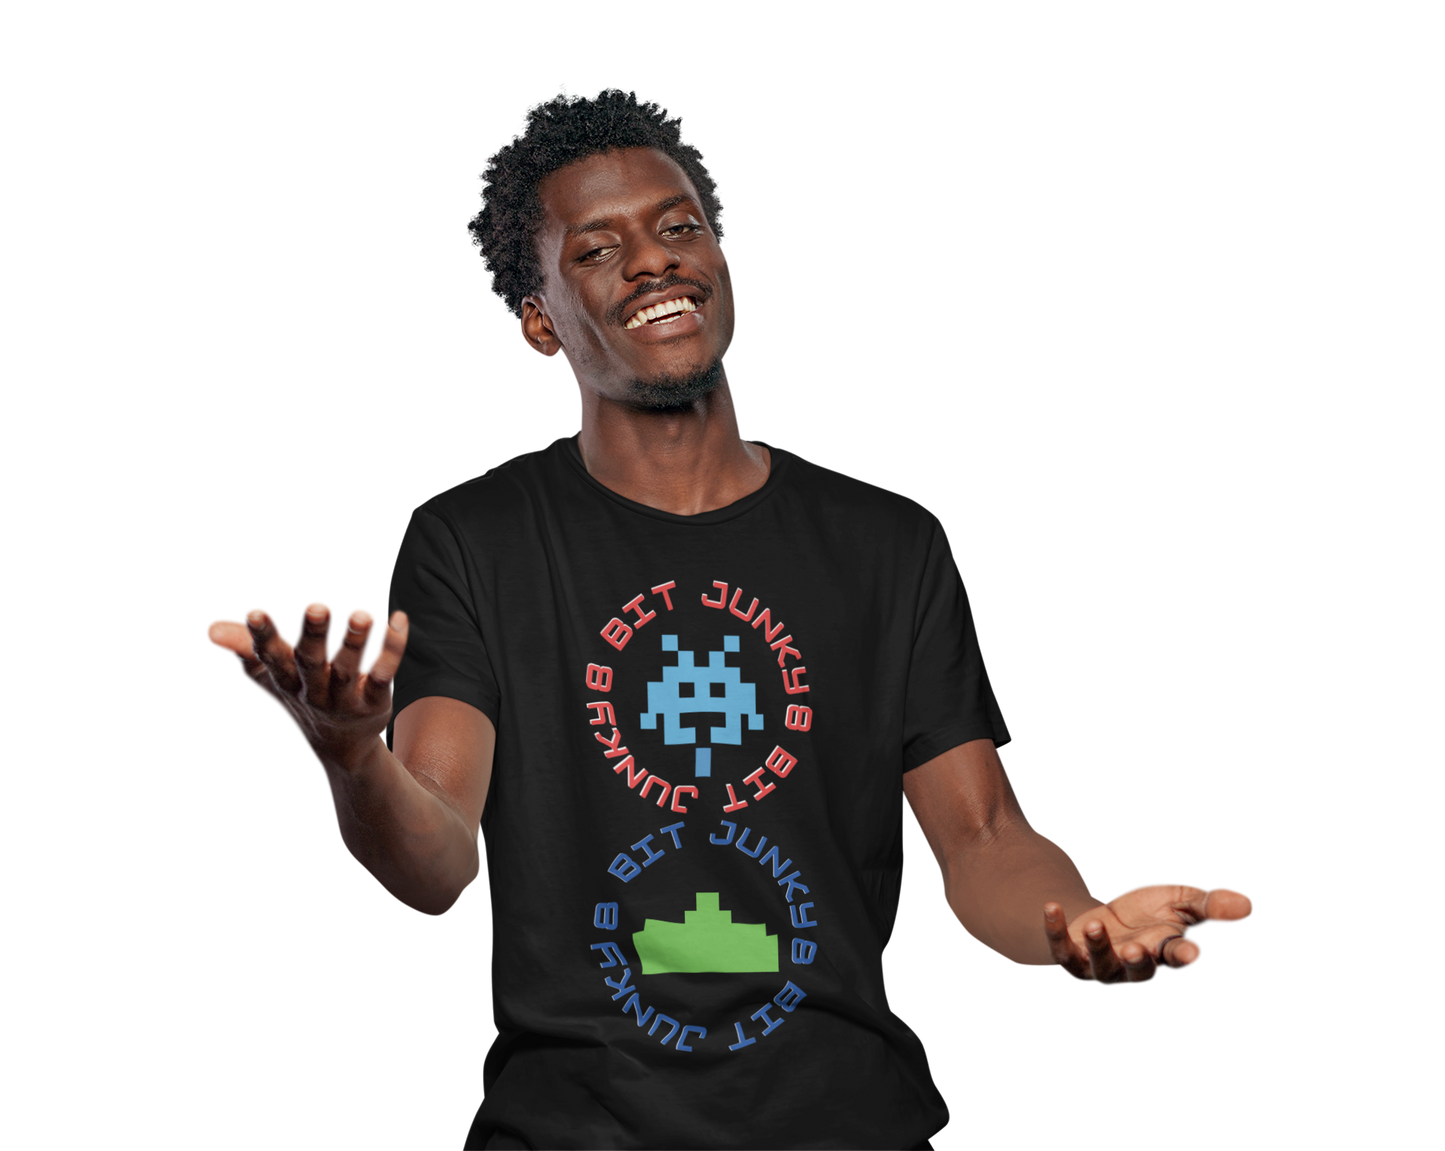 A man wearing a black T-Shirt with words 8-bit junky in 2 circles making a figure 8 with an invader in one circle and earth ship in the other